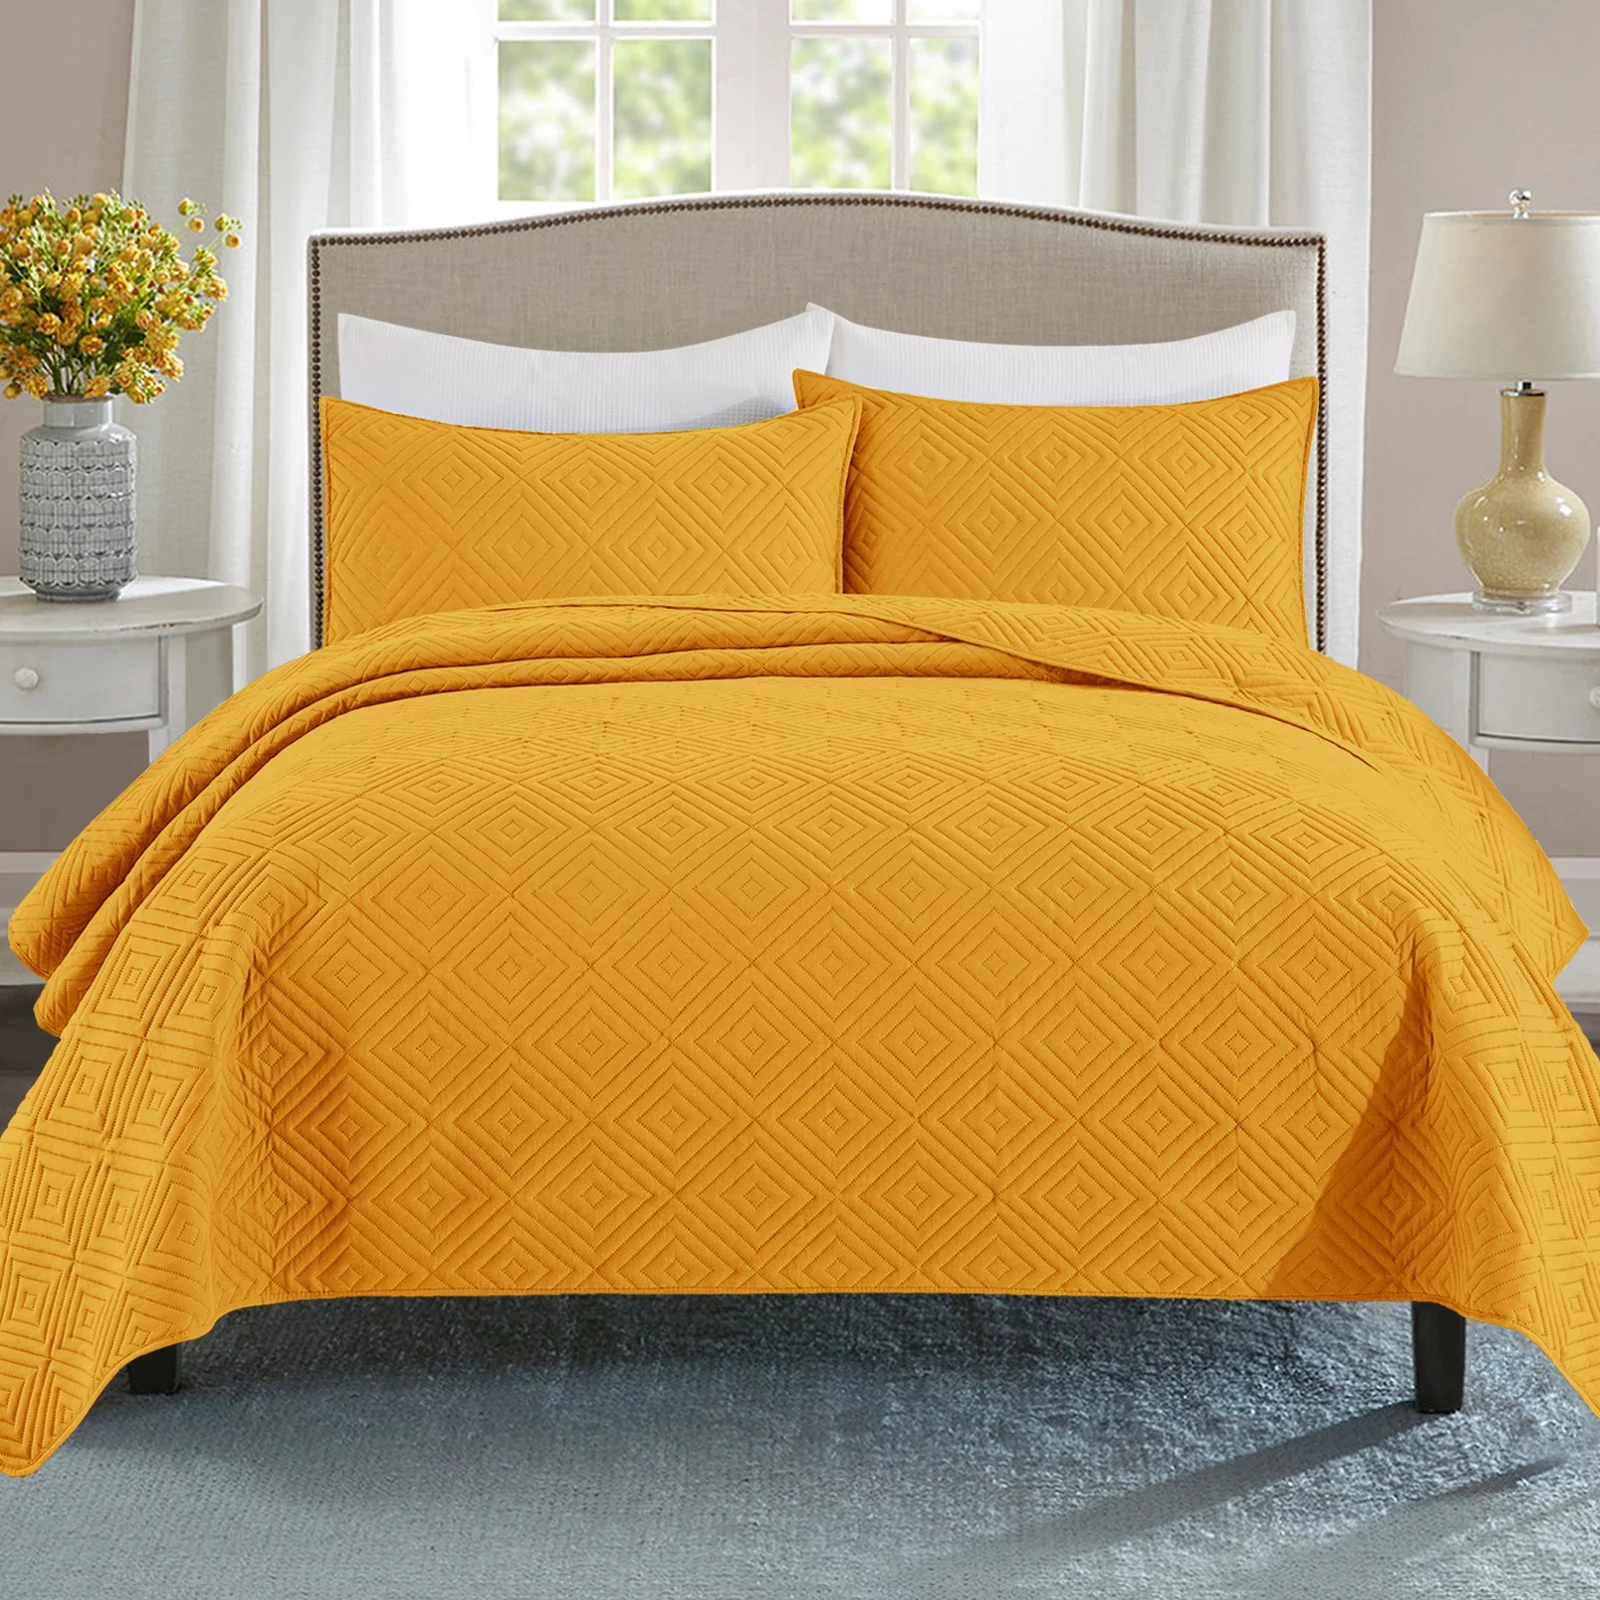 Exclusivo Mezcla 3-Piece Yellow Queen Size Quilt Set, Square Pattern Ultrasonic Lightweight and Soft Quilts/Bedspreads/Coverlets/Bedding Set (1 Quilt, 2 Pillow Shams) for All Seasons